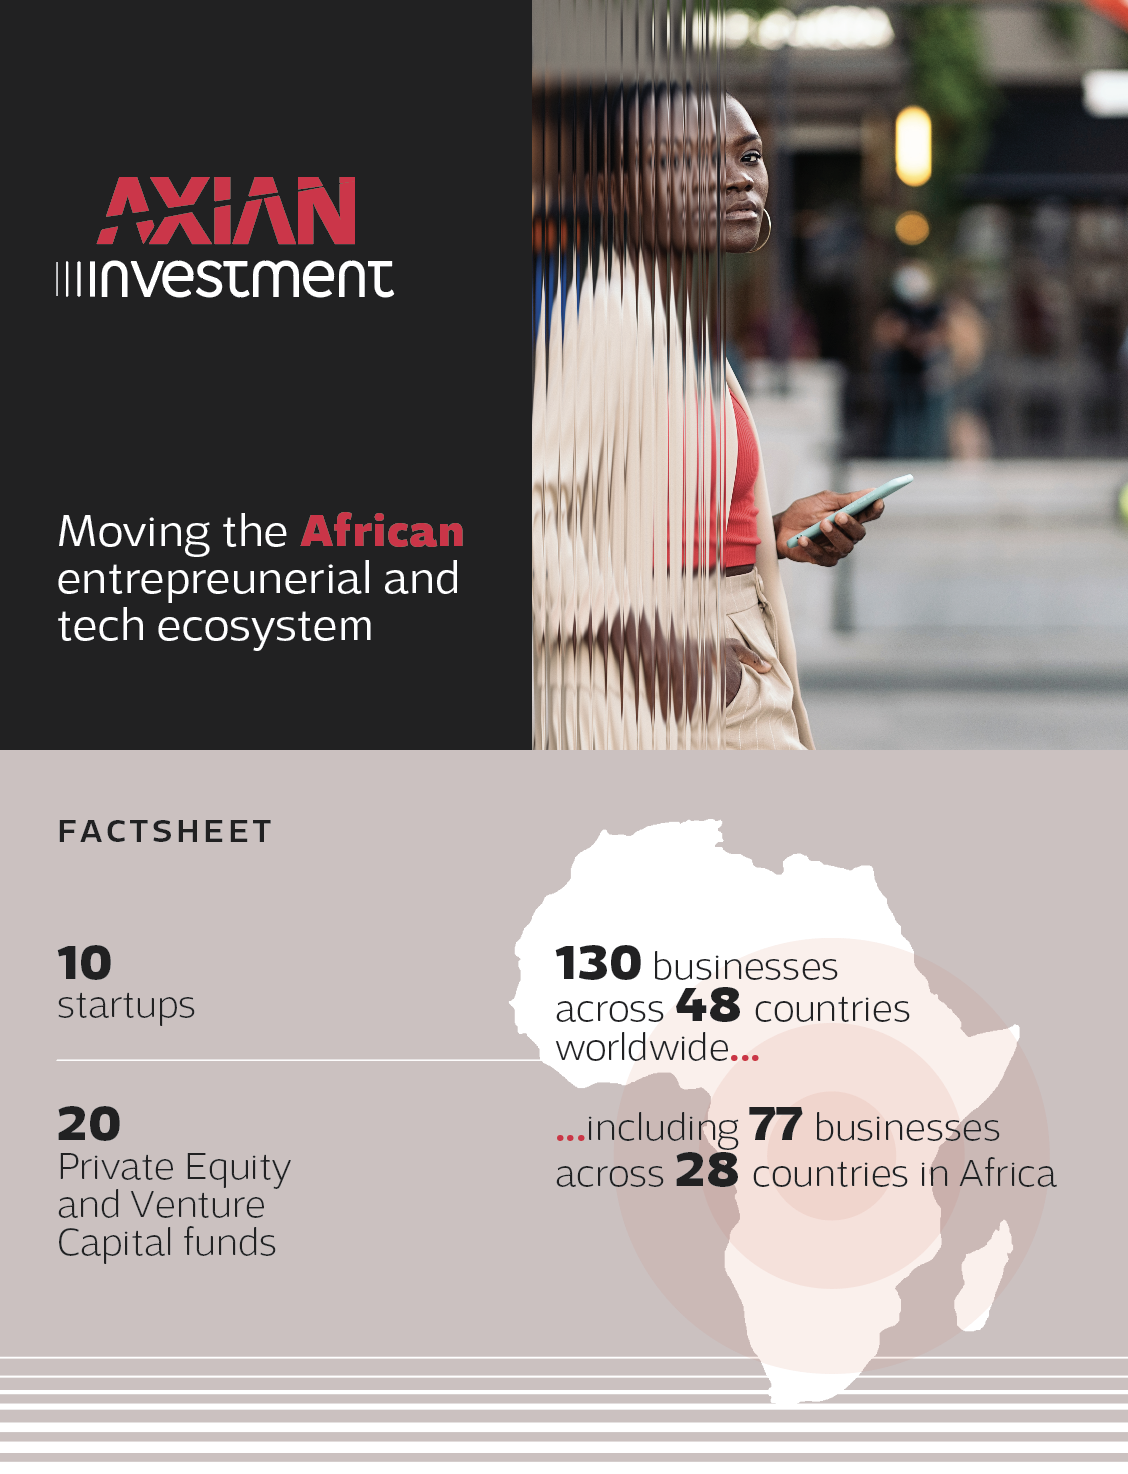 AXIAN expands its support for african businesses and innovation with new investment unit